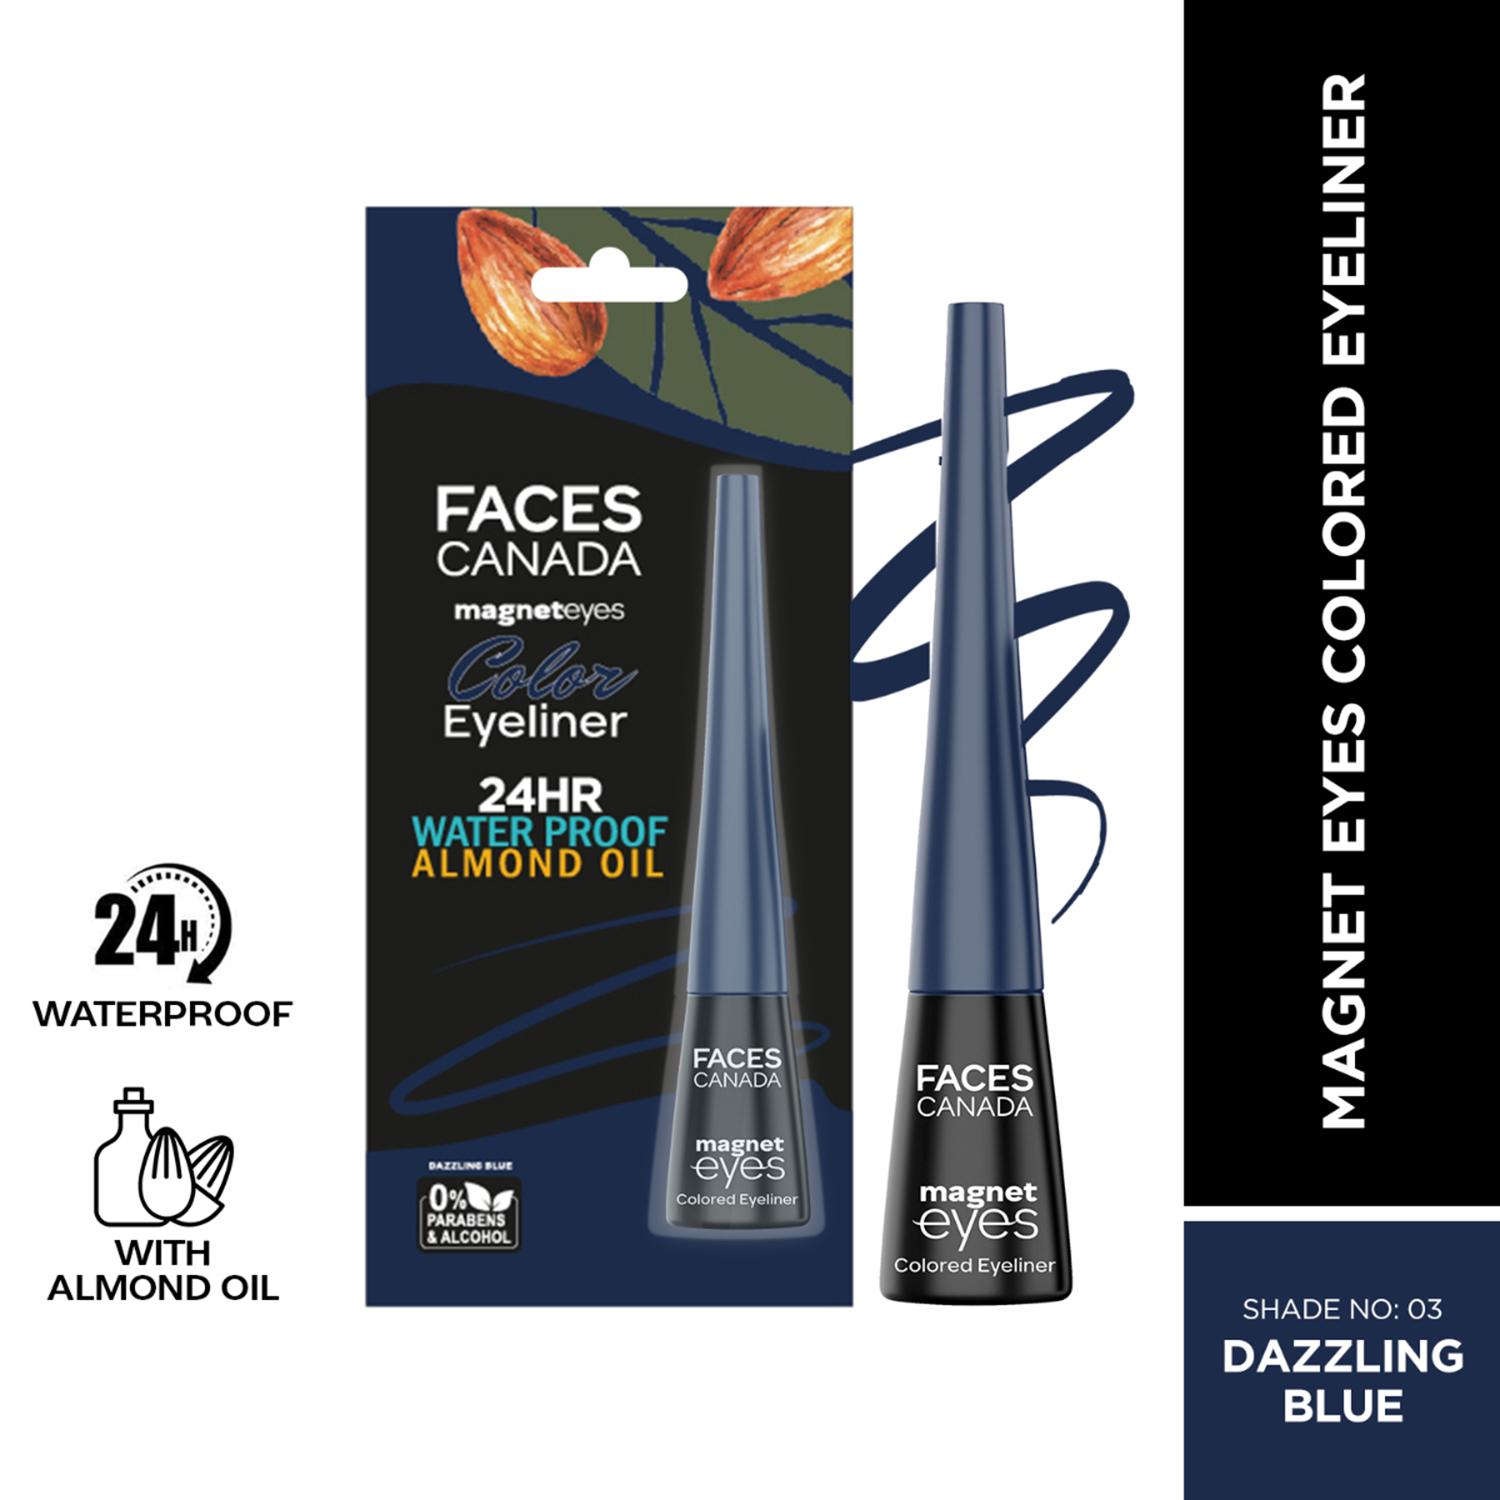 Faces Canada | Faces Canada Magneteyes Color Eyeliner - Dazzling Blue, Glossy Finish, 24HR Long-lasting (4 ml)